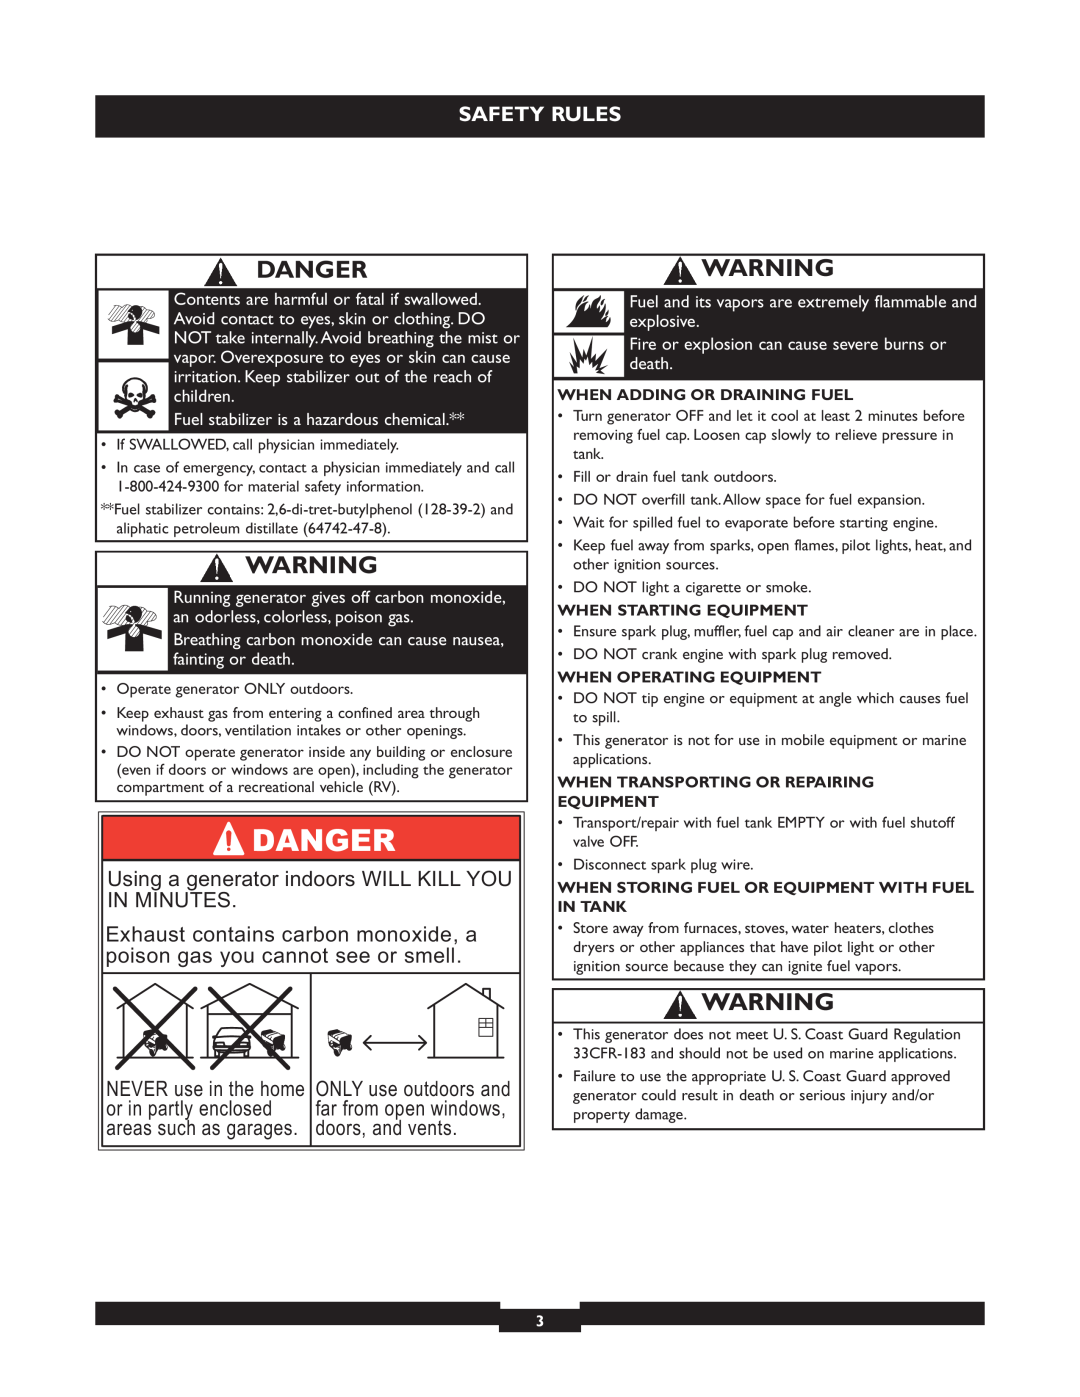 Briggs & Stratton 01655-3 Danger, Exhaust contains carbon monoxide, a, poison gas you cannot see or smell, Safety Rules 